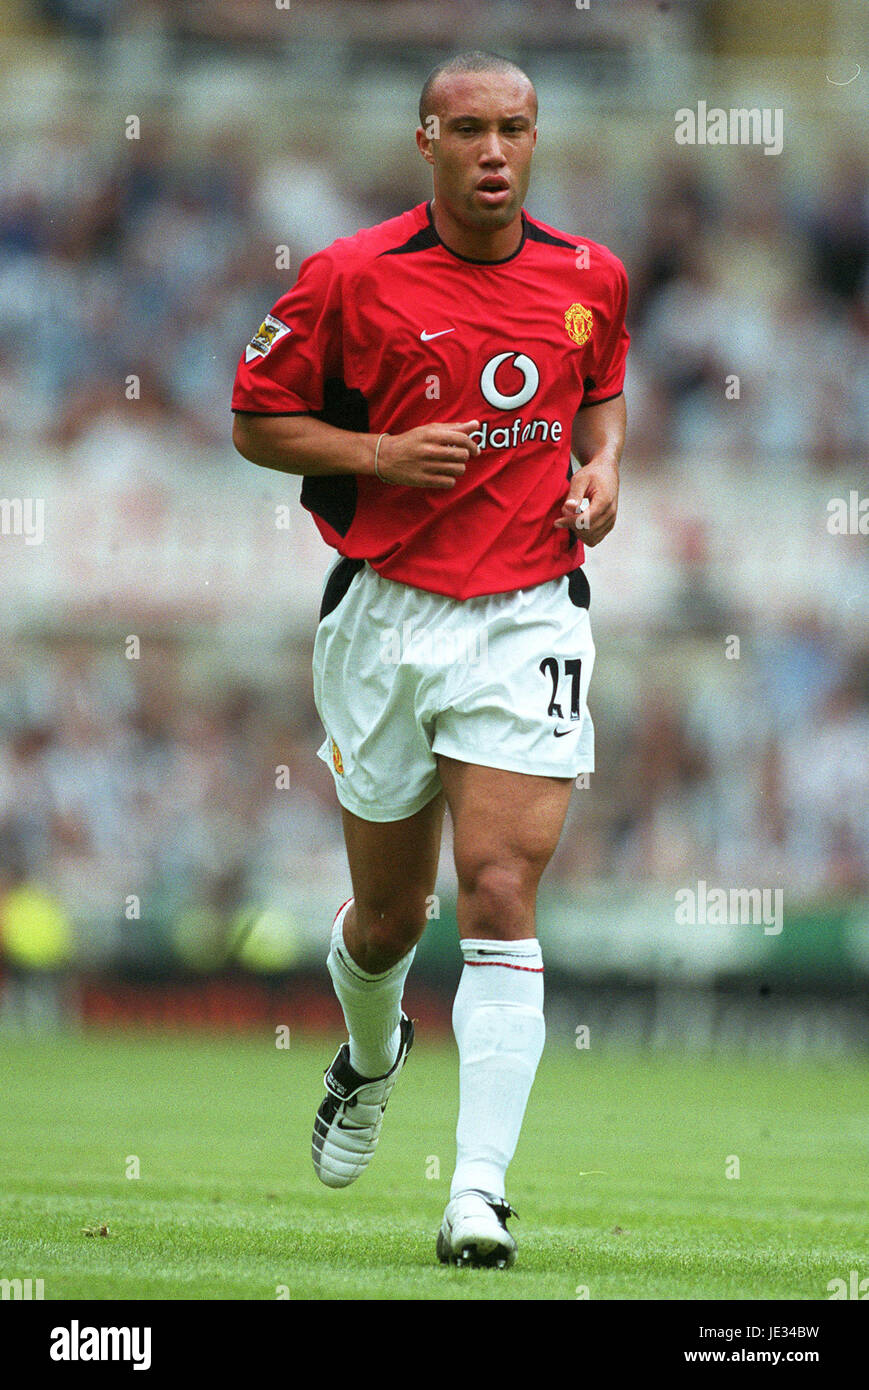 MIKAEL SILVESTRE MANCHESTER UNITED FC ST. JAMES PARK NEWCASTLE ENGLAND 23 August 2003 Stock Photo